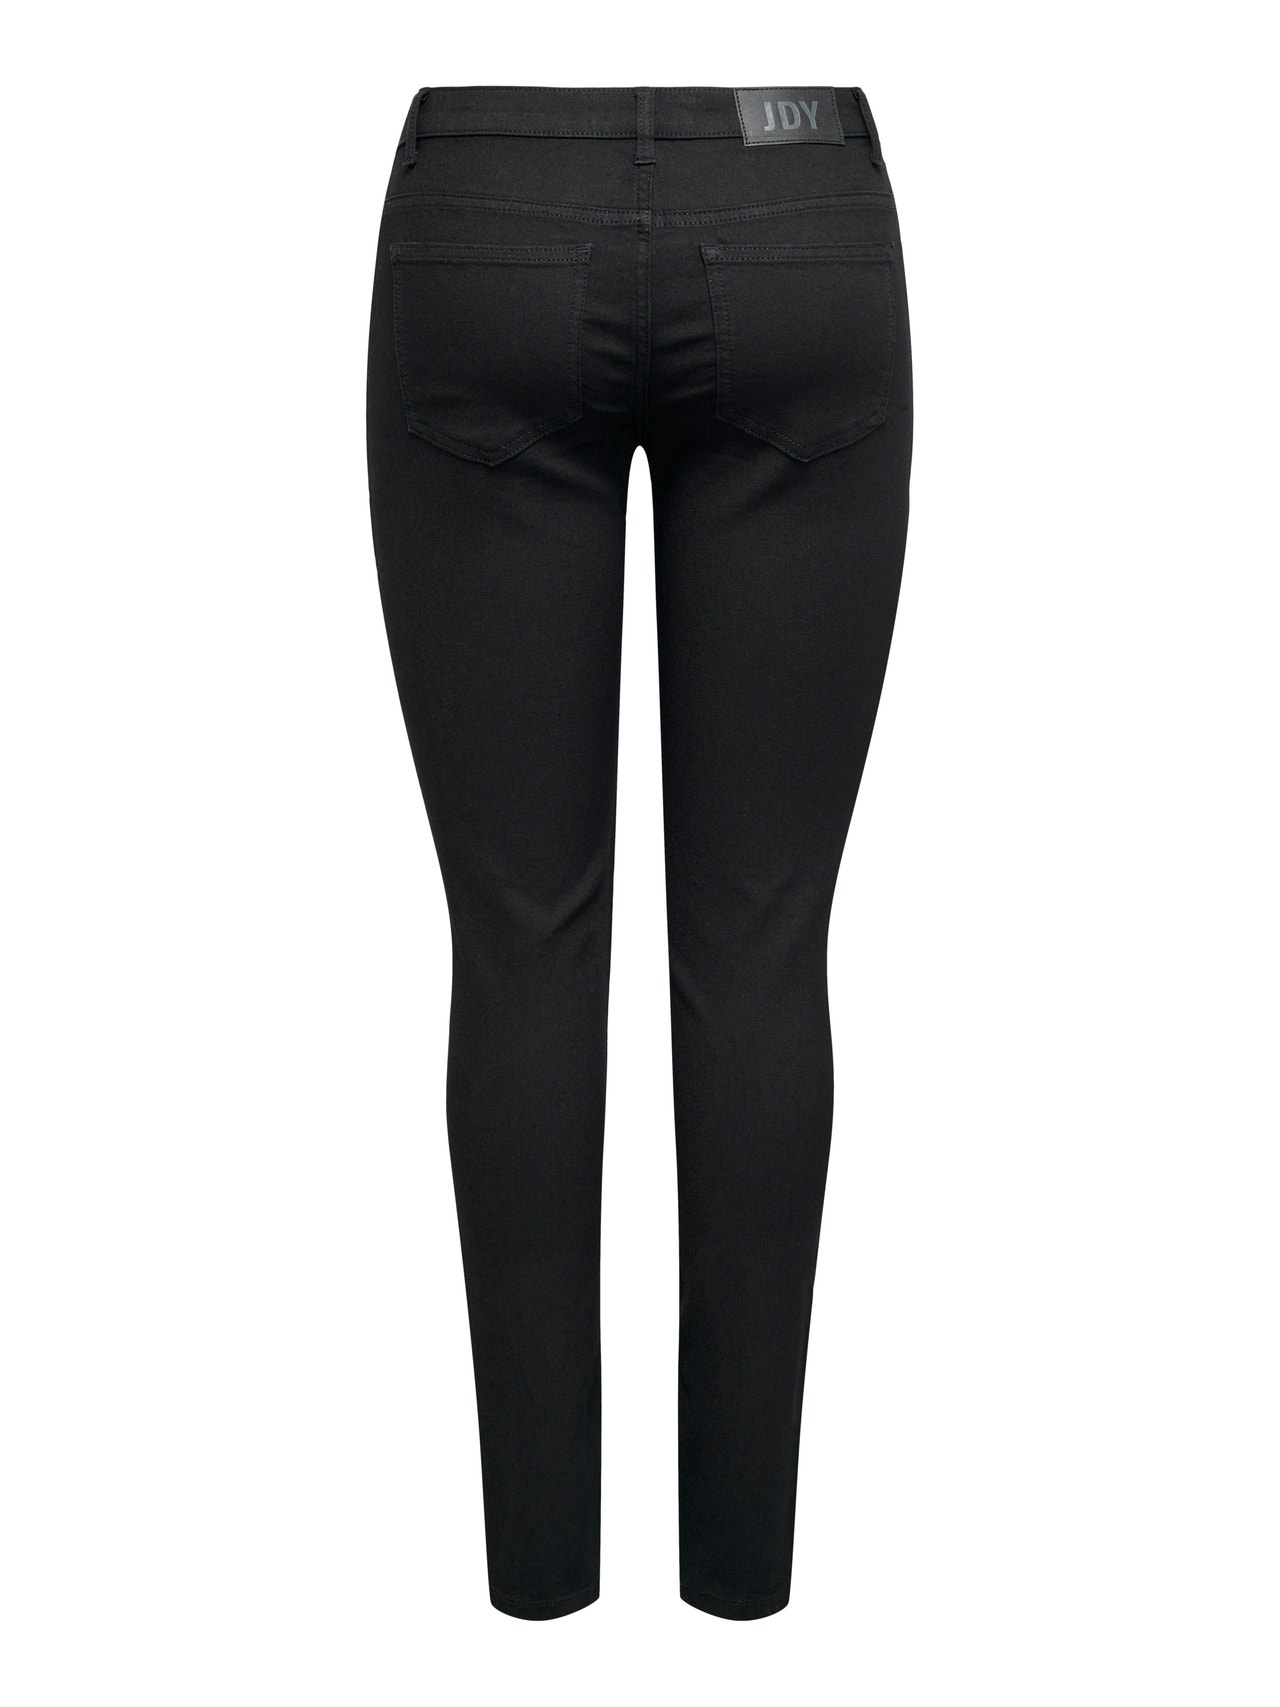 ONLY Jeans Skinny Fit Taille classique -Black Denim - 15271705